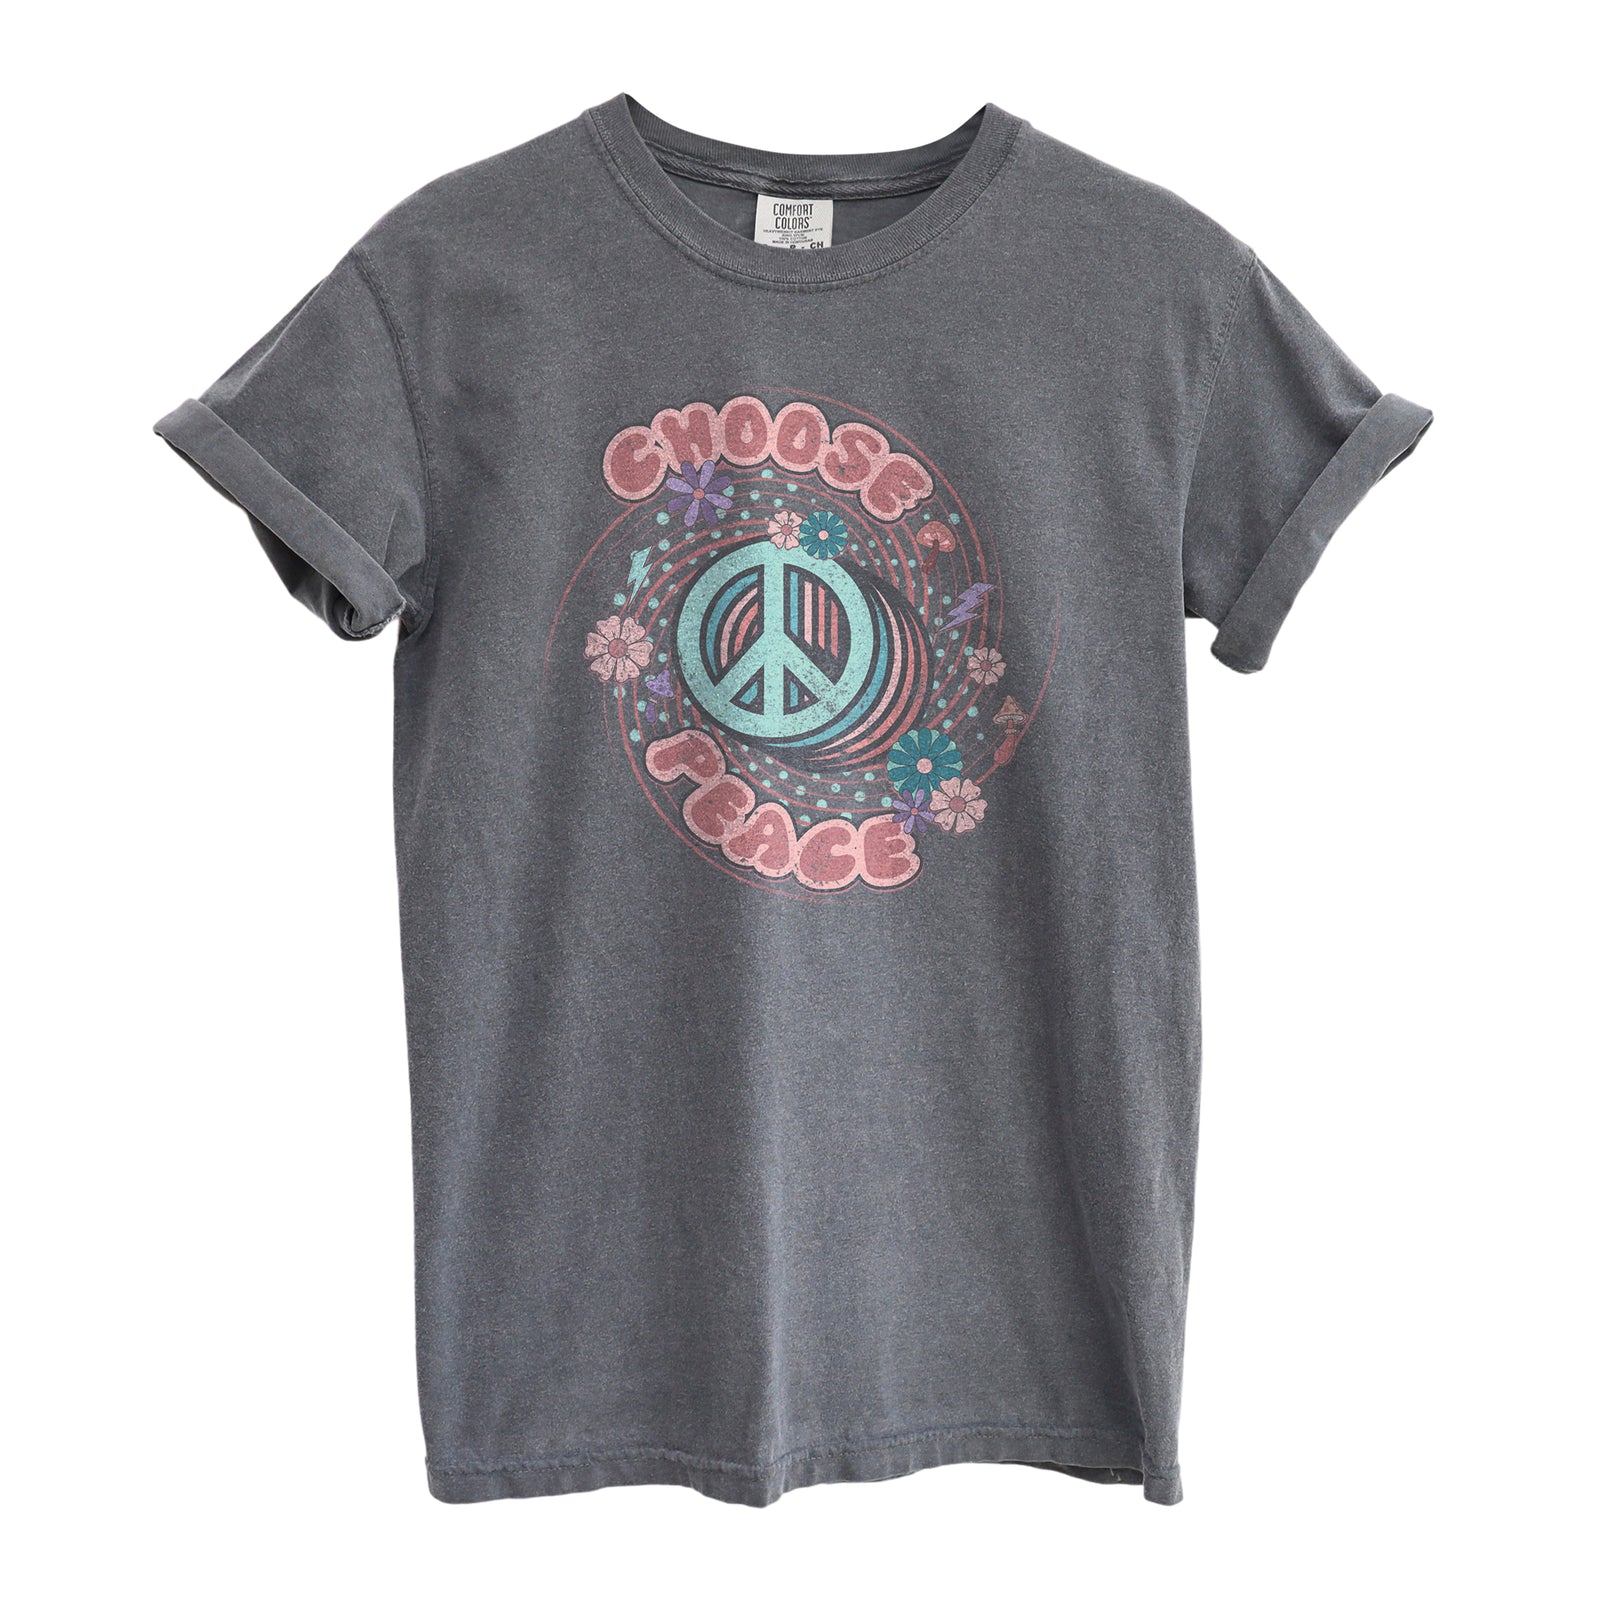 Choose Peace Oversized Shirt Garment-Dyed Graphic Tee